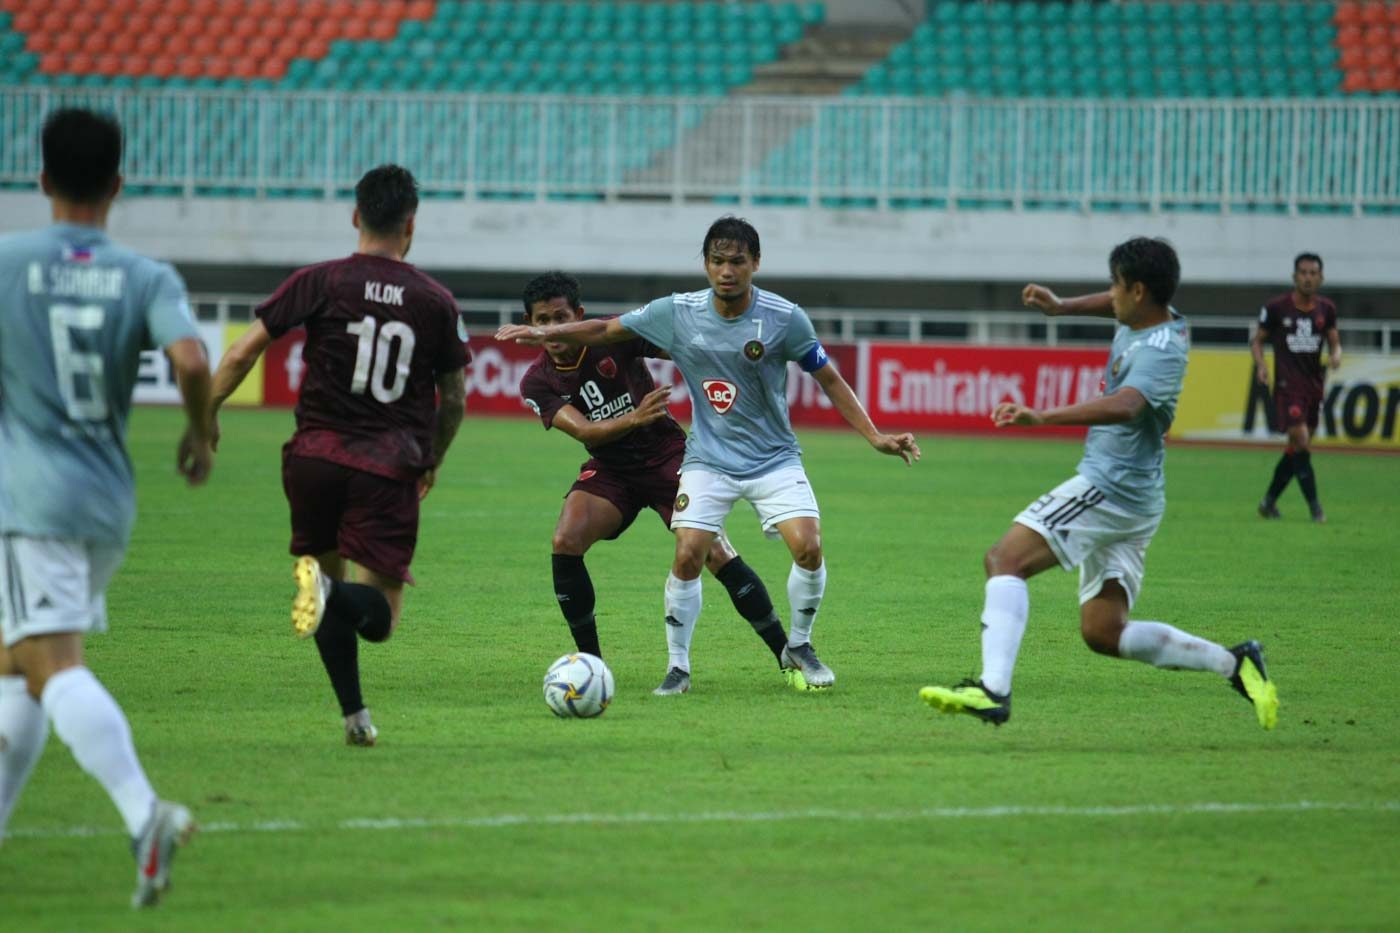 AFC CUP: Kaya-Iloilo braces for vicious PSM Makassar at home